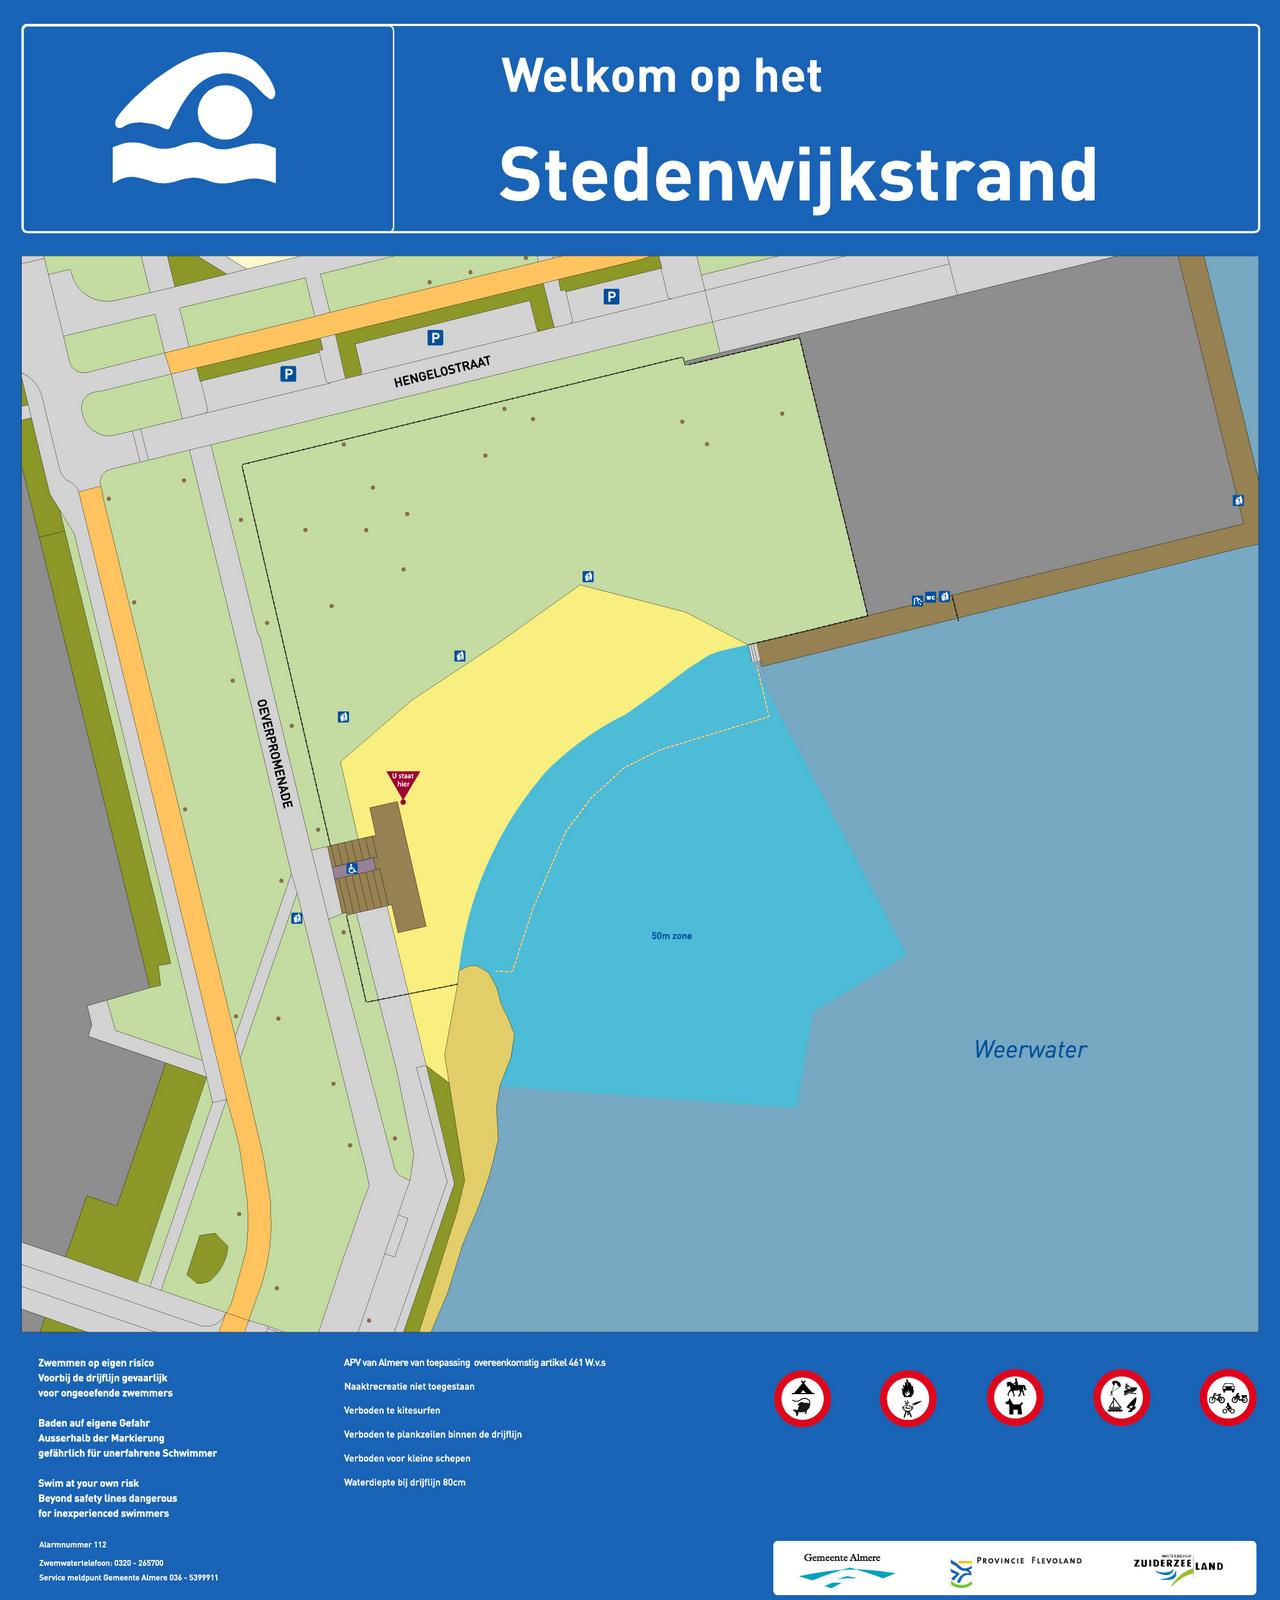 The information board at the swimming location Stedenwijkstrand, Weerwater